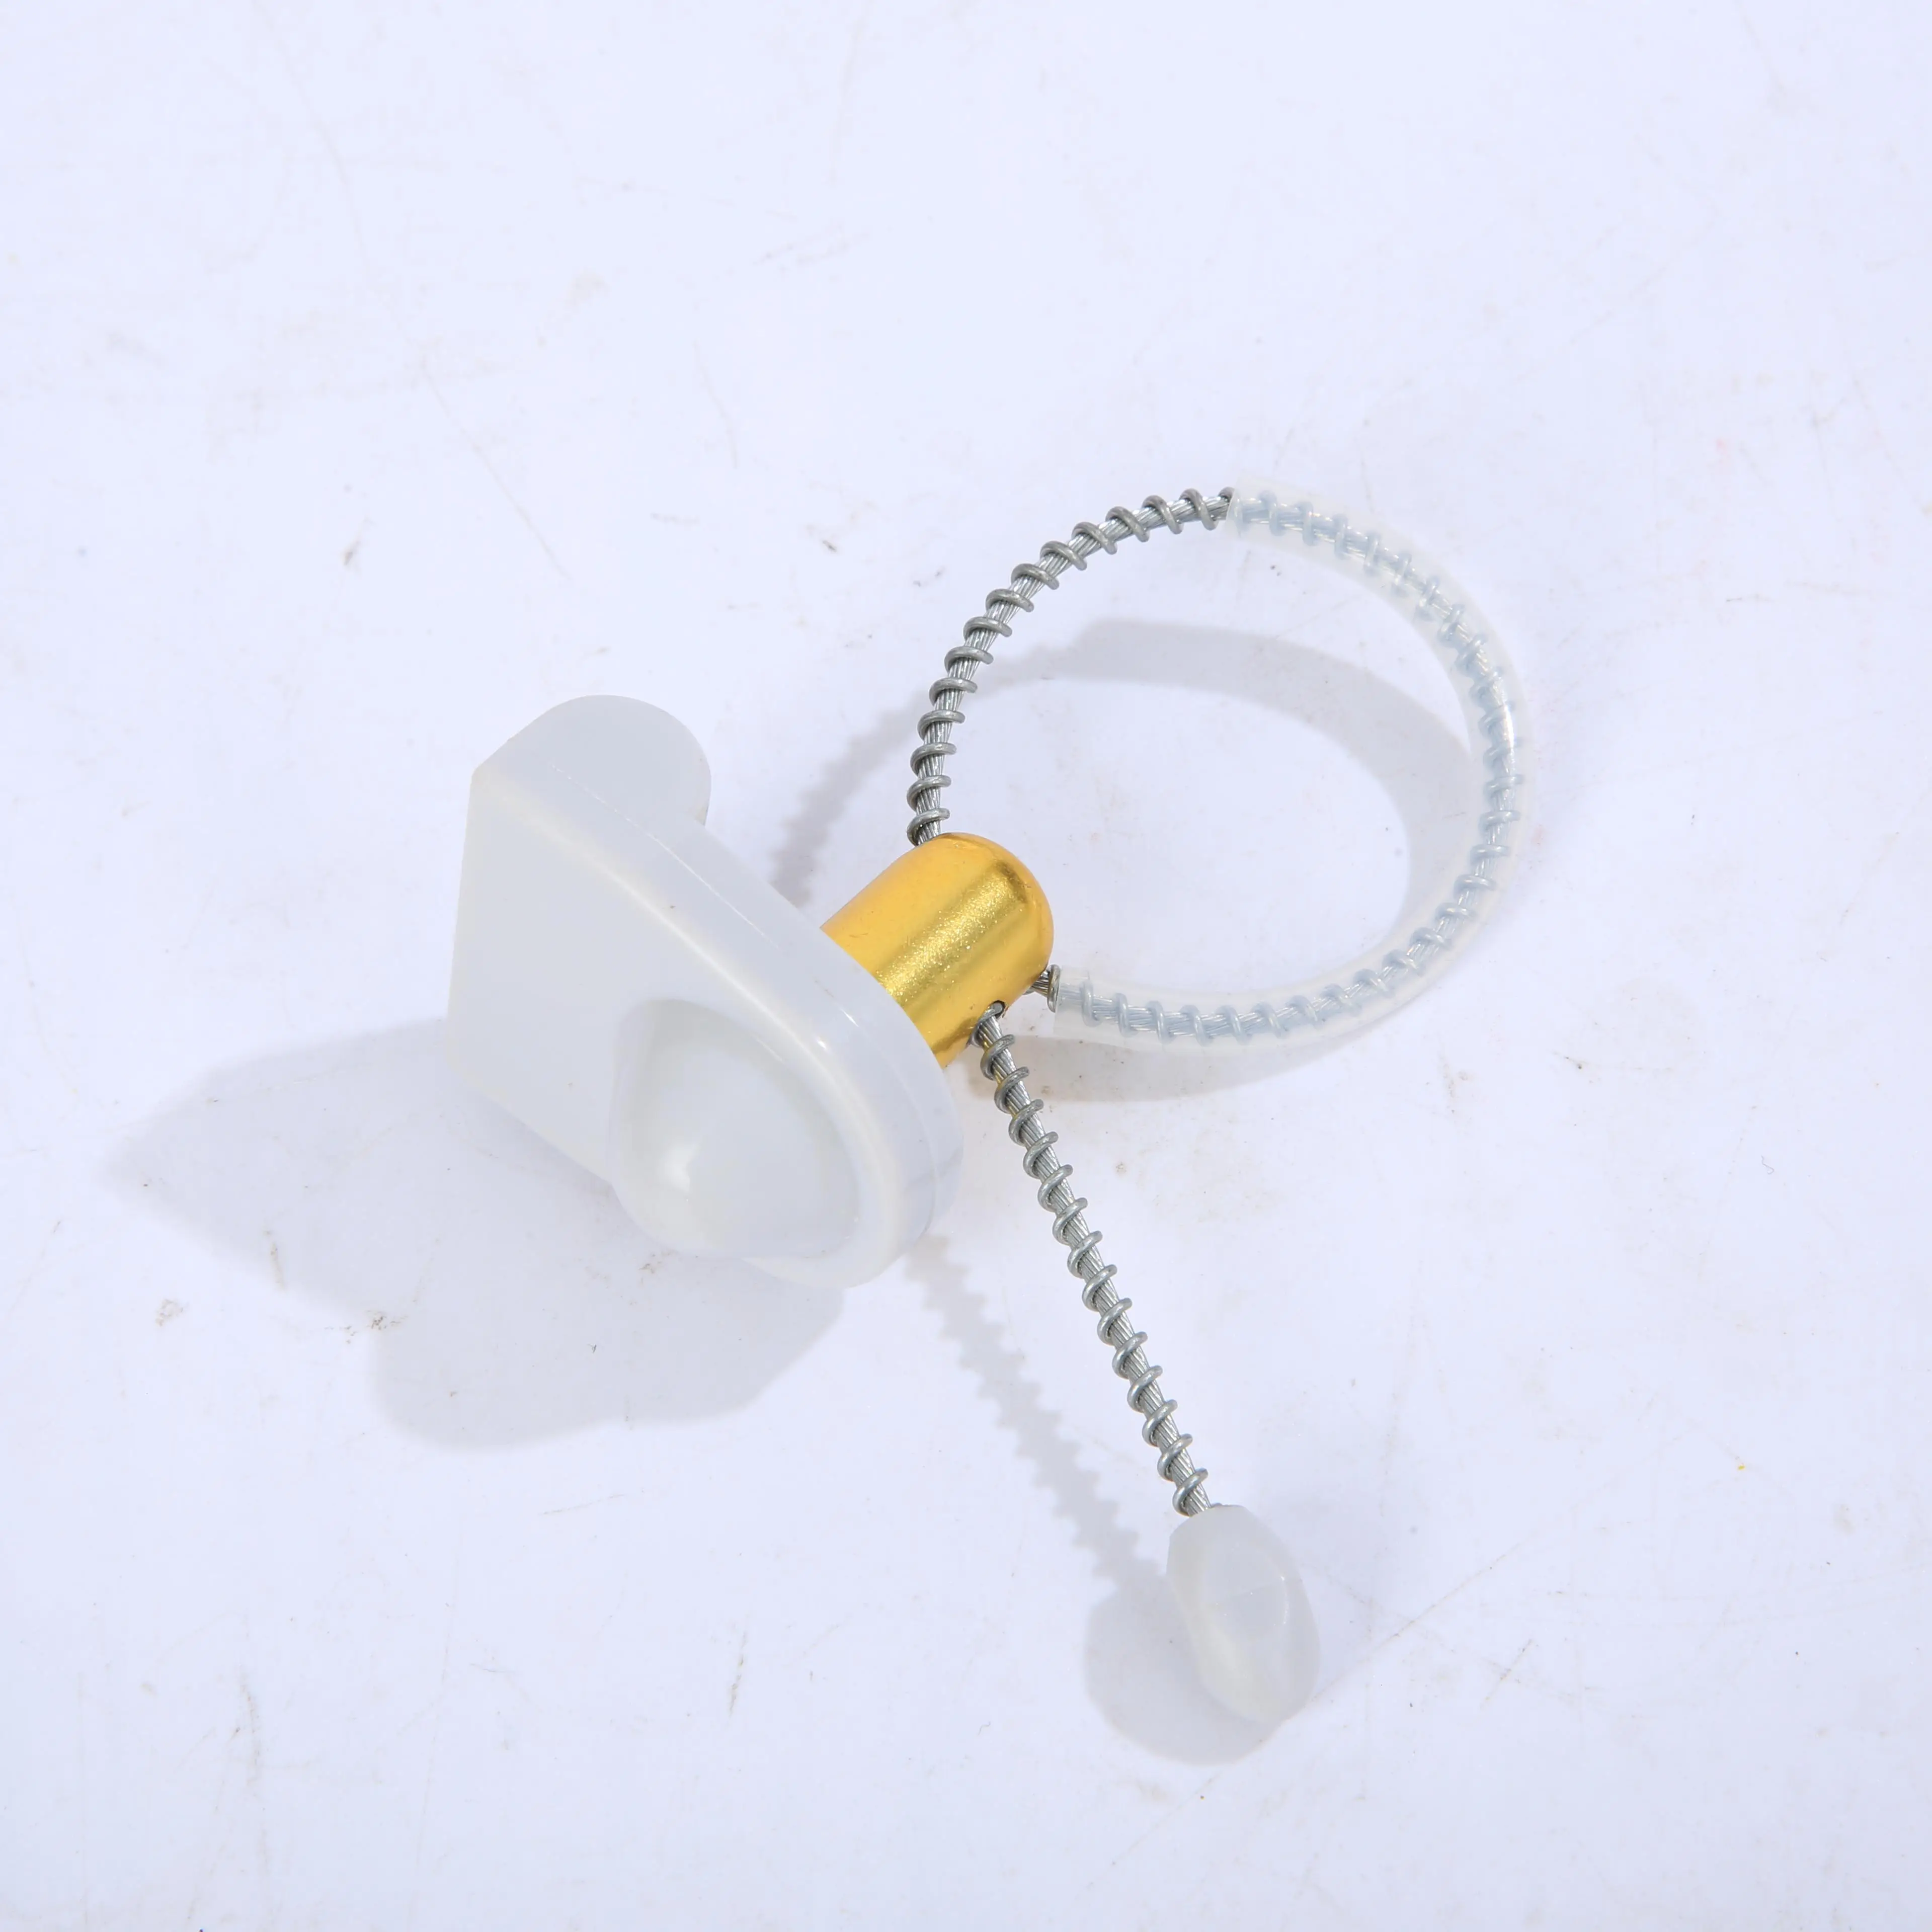 Factory Direct Sale 58khz Milk Powder Baby Milk Can Security Tag EAS Milk Tag